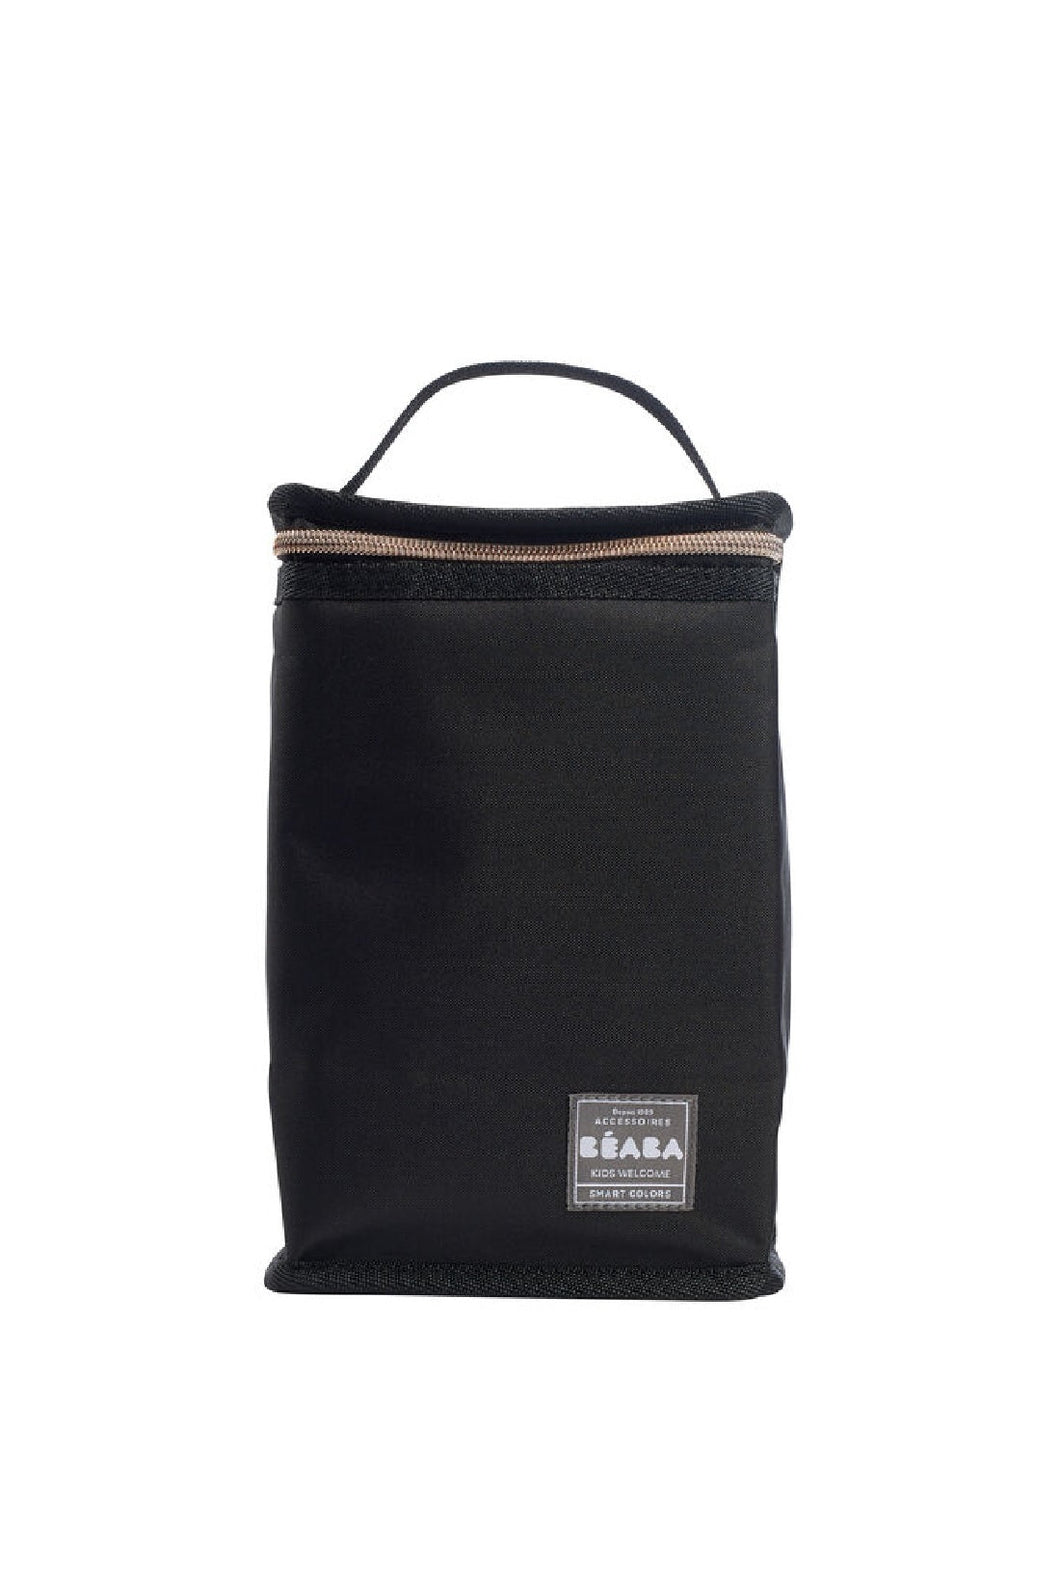 Beaba Isothermal Meal Pouch Black Bundle item 1